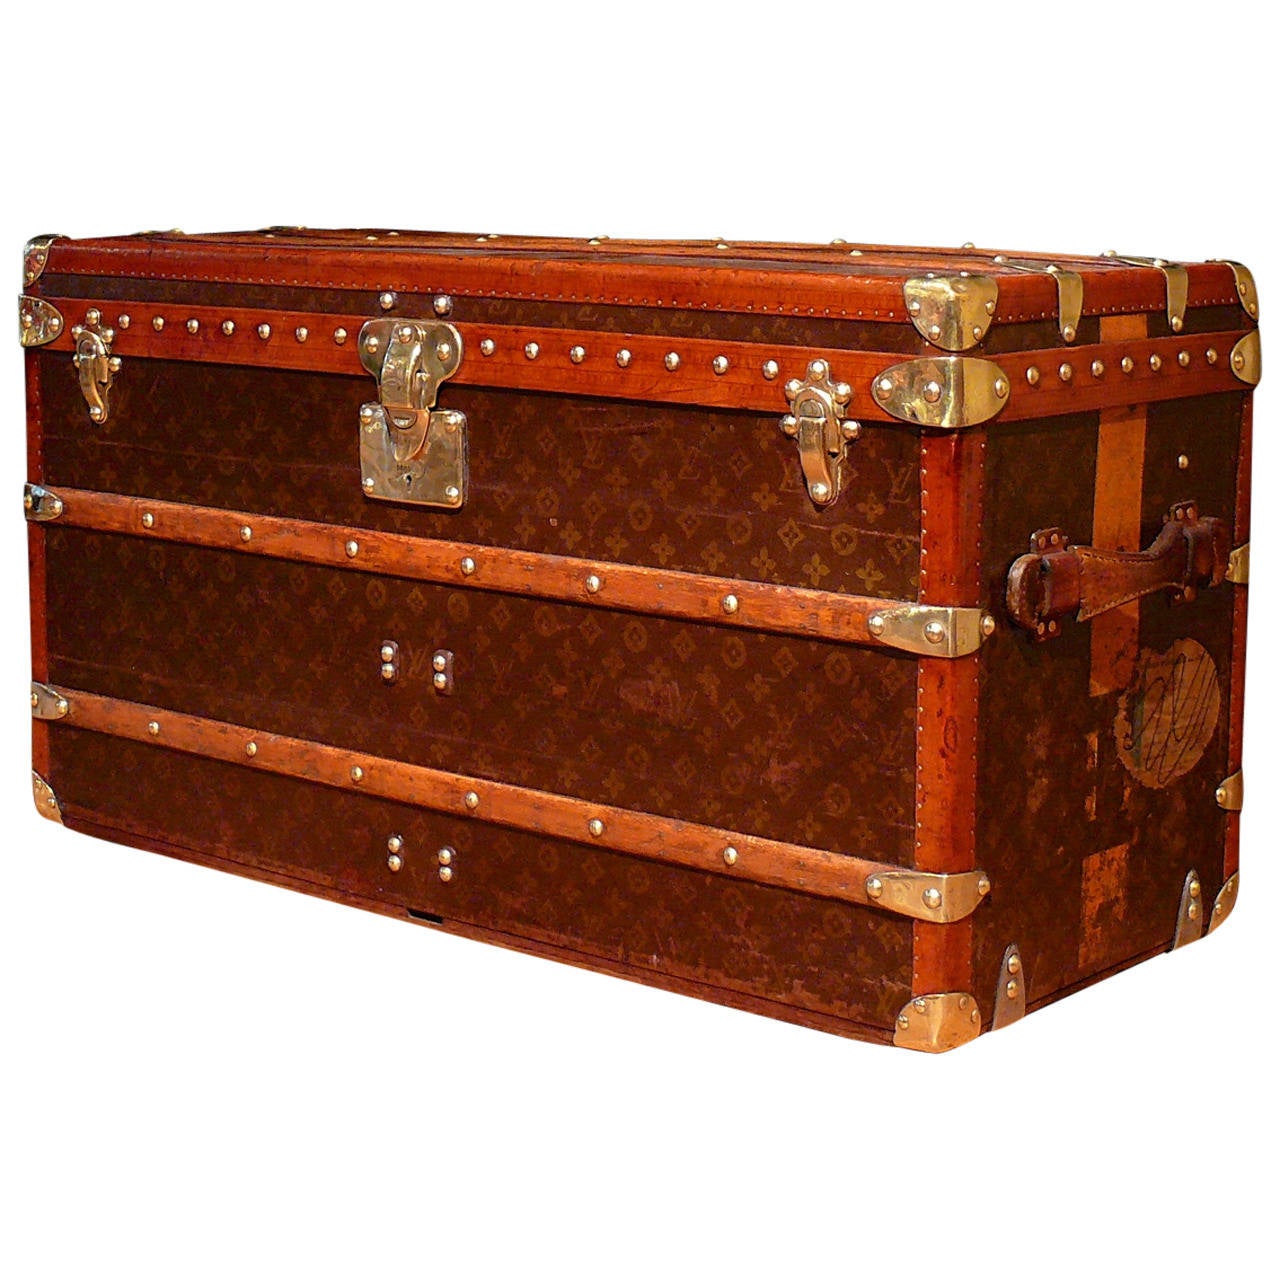 Delightful Louis Vuitton Shoe Trunk with Striped Livery, circa 1935 at 1stdibs